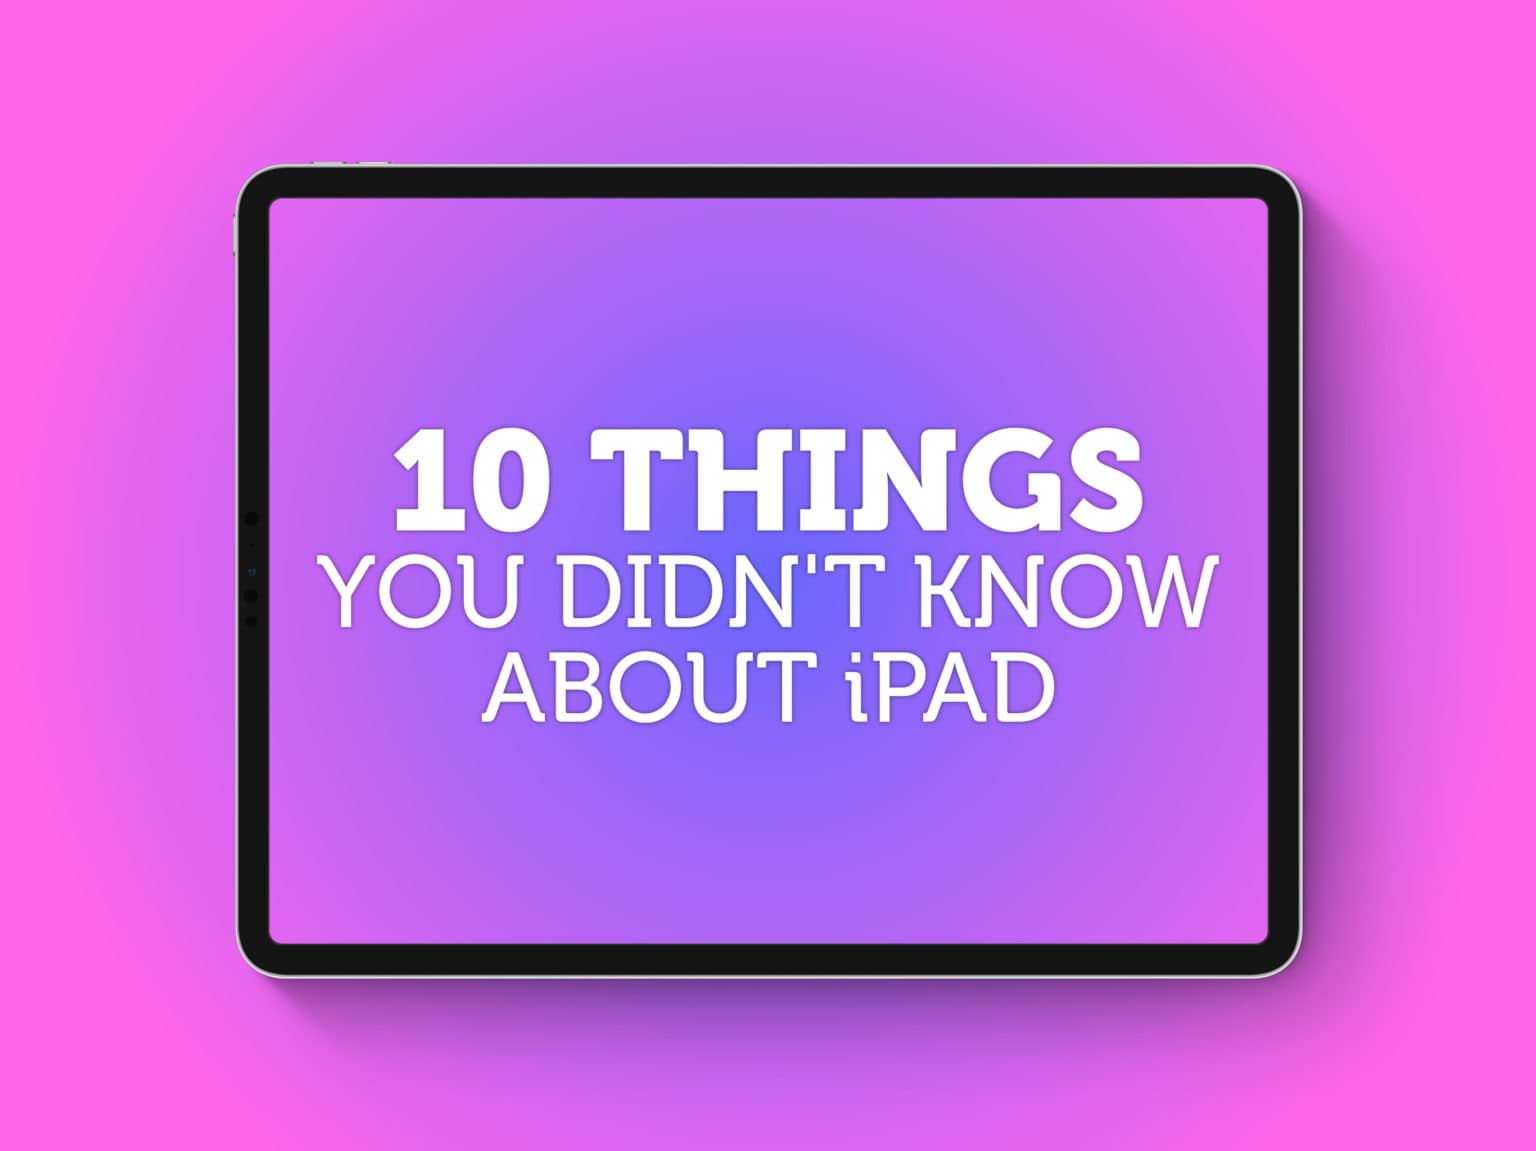 iPad trivia: 10 things you didn't know about iPad